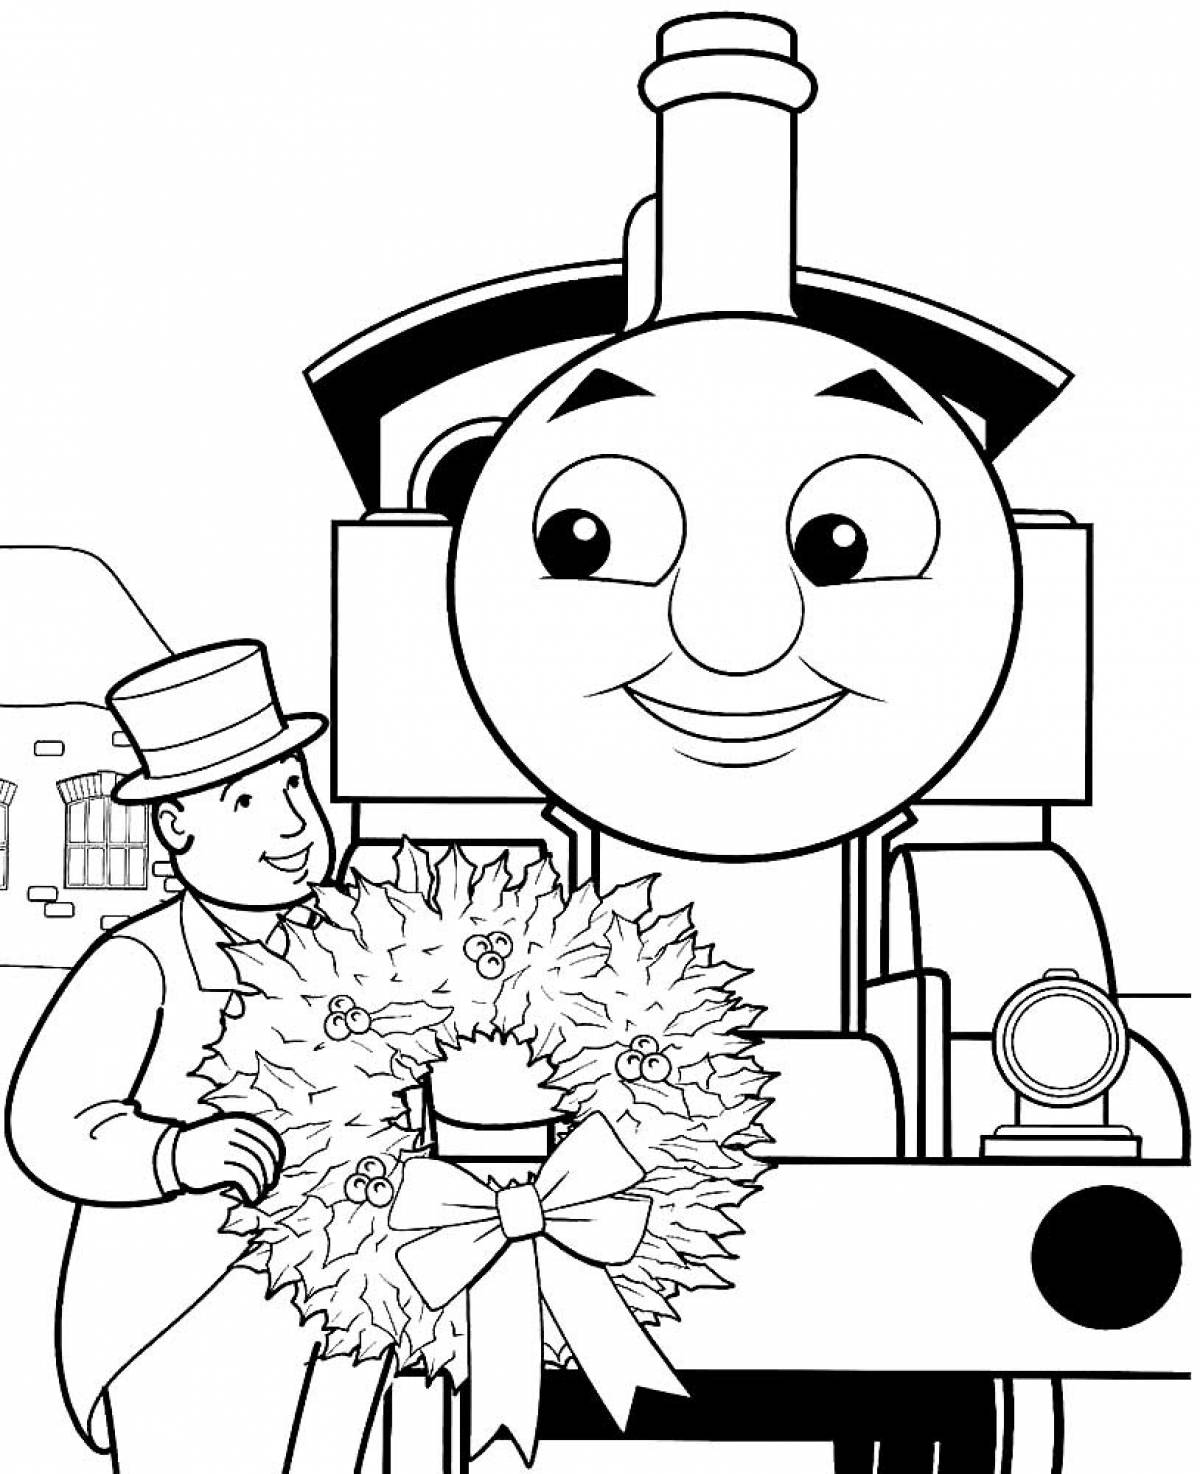 Thomas the Tank Engine with a Wreath